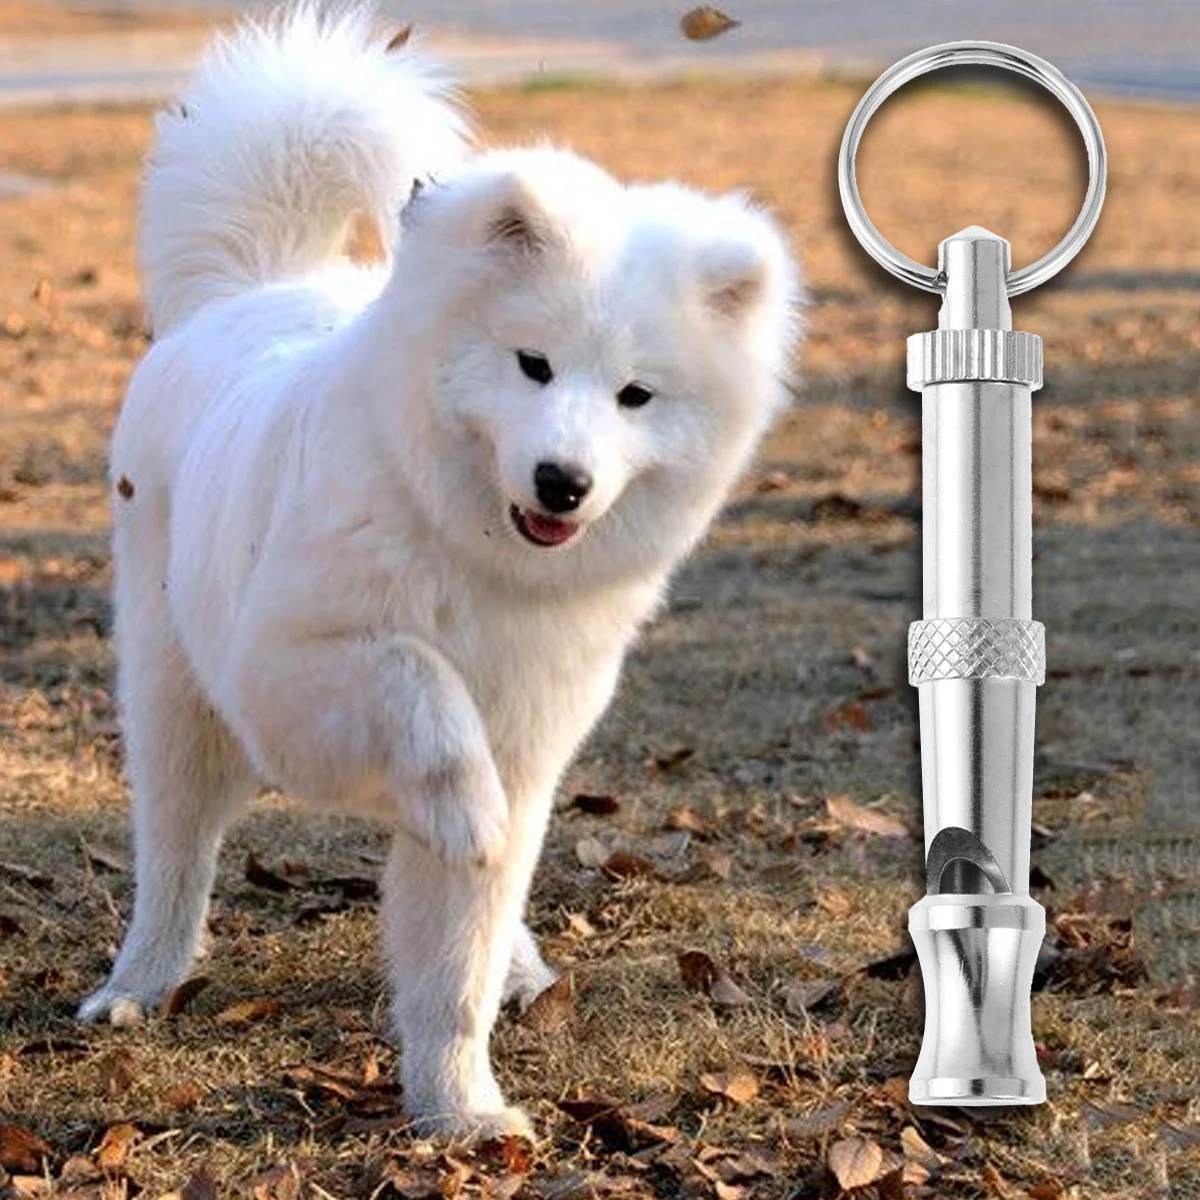 

Whistle Dog Training Whistles Dogs Silent Tool Barking Stop Sound Copper Best Lanyard Control Bark Recall Running Puppy Survival